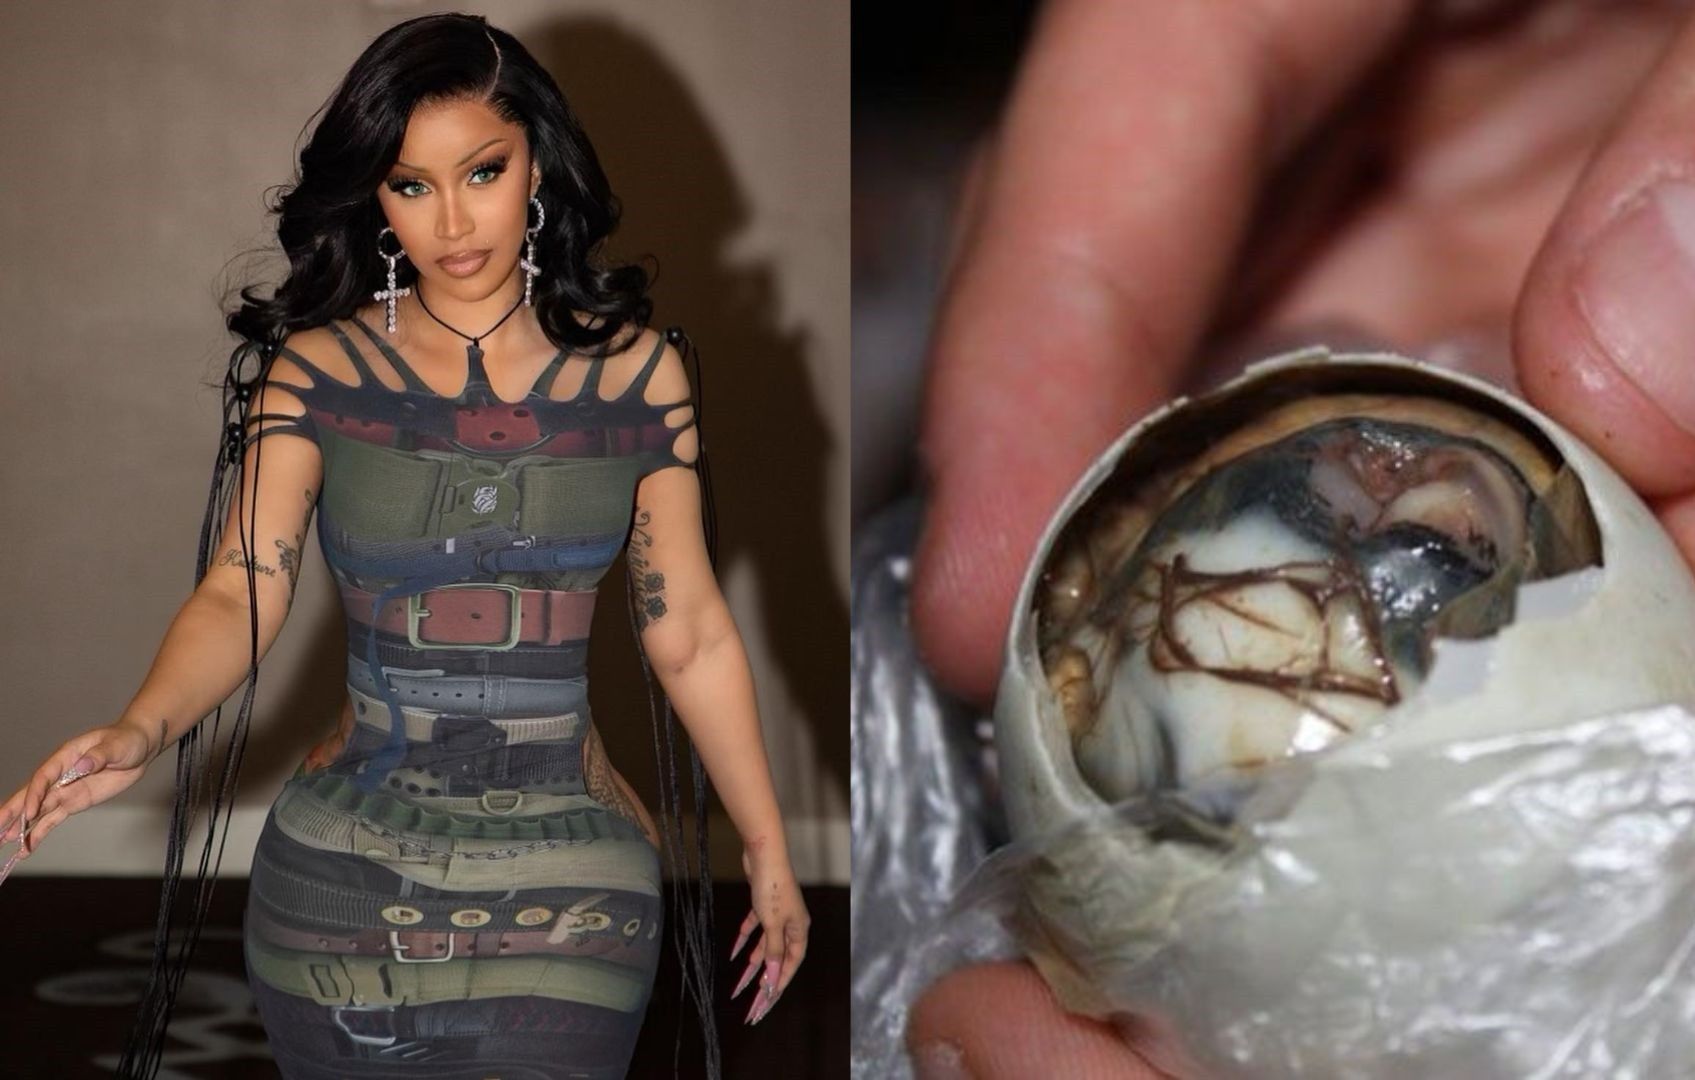 'Not for me': Cardi B tries, spits out balut